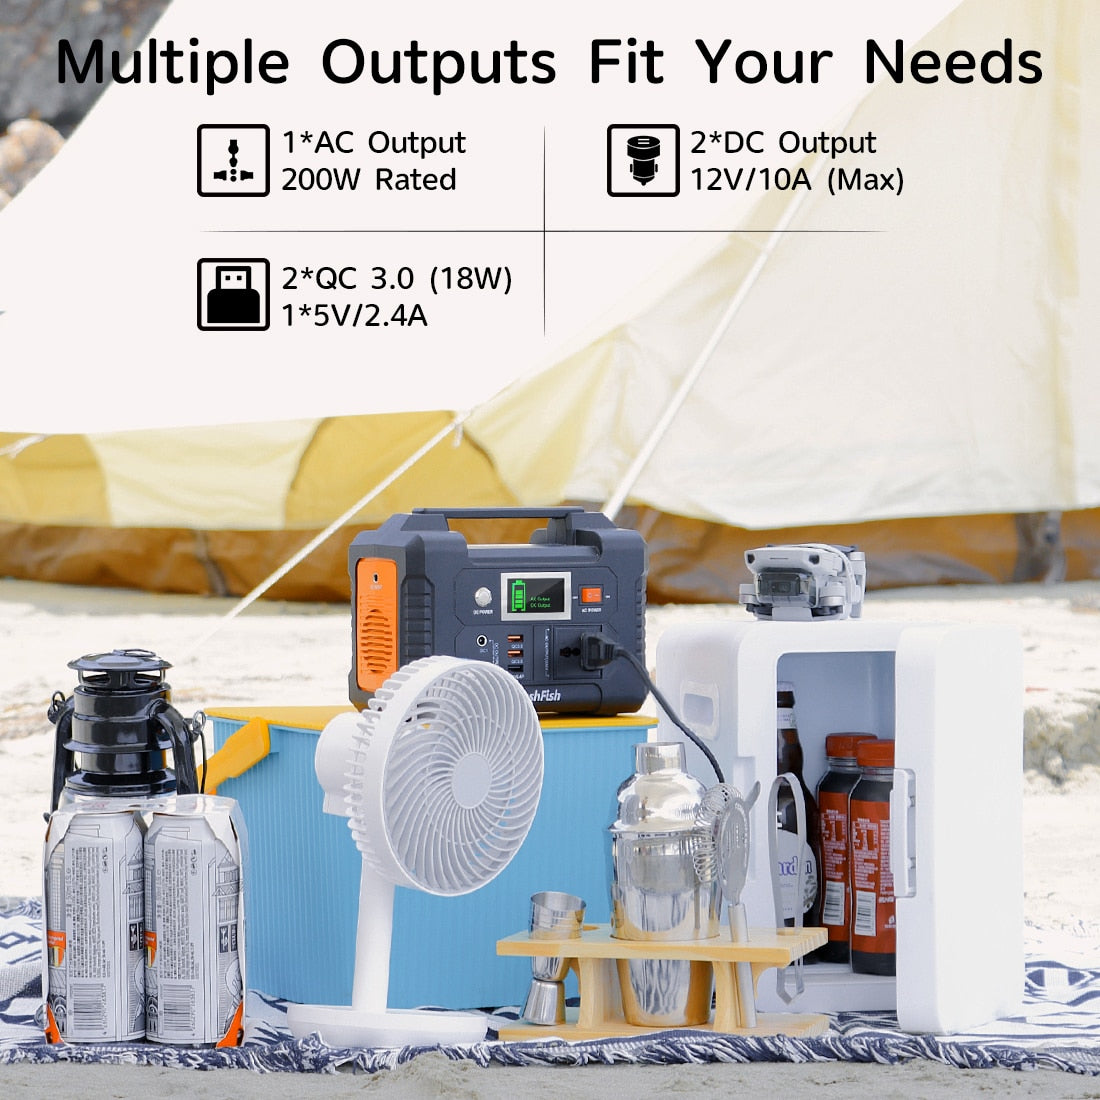 Multiple Outputs Fit Your Needs 1*AC Output 2